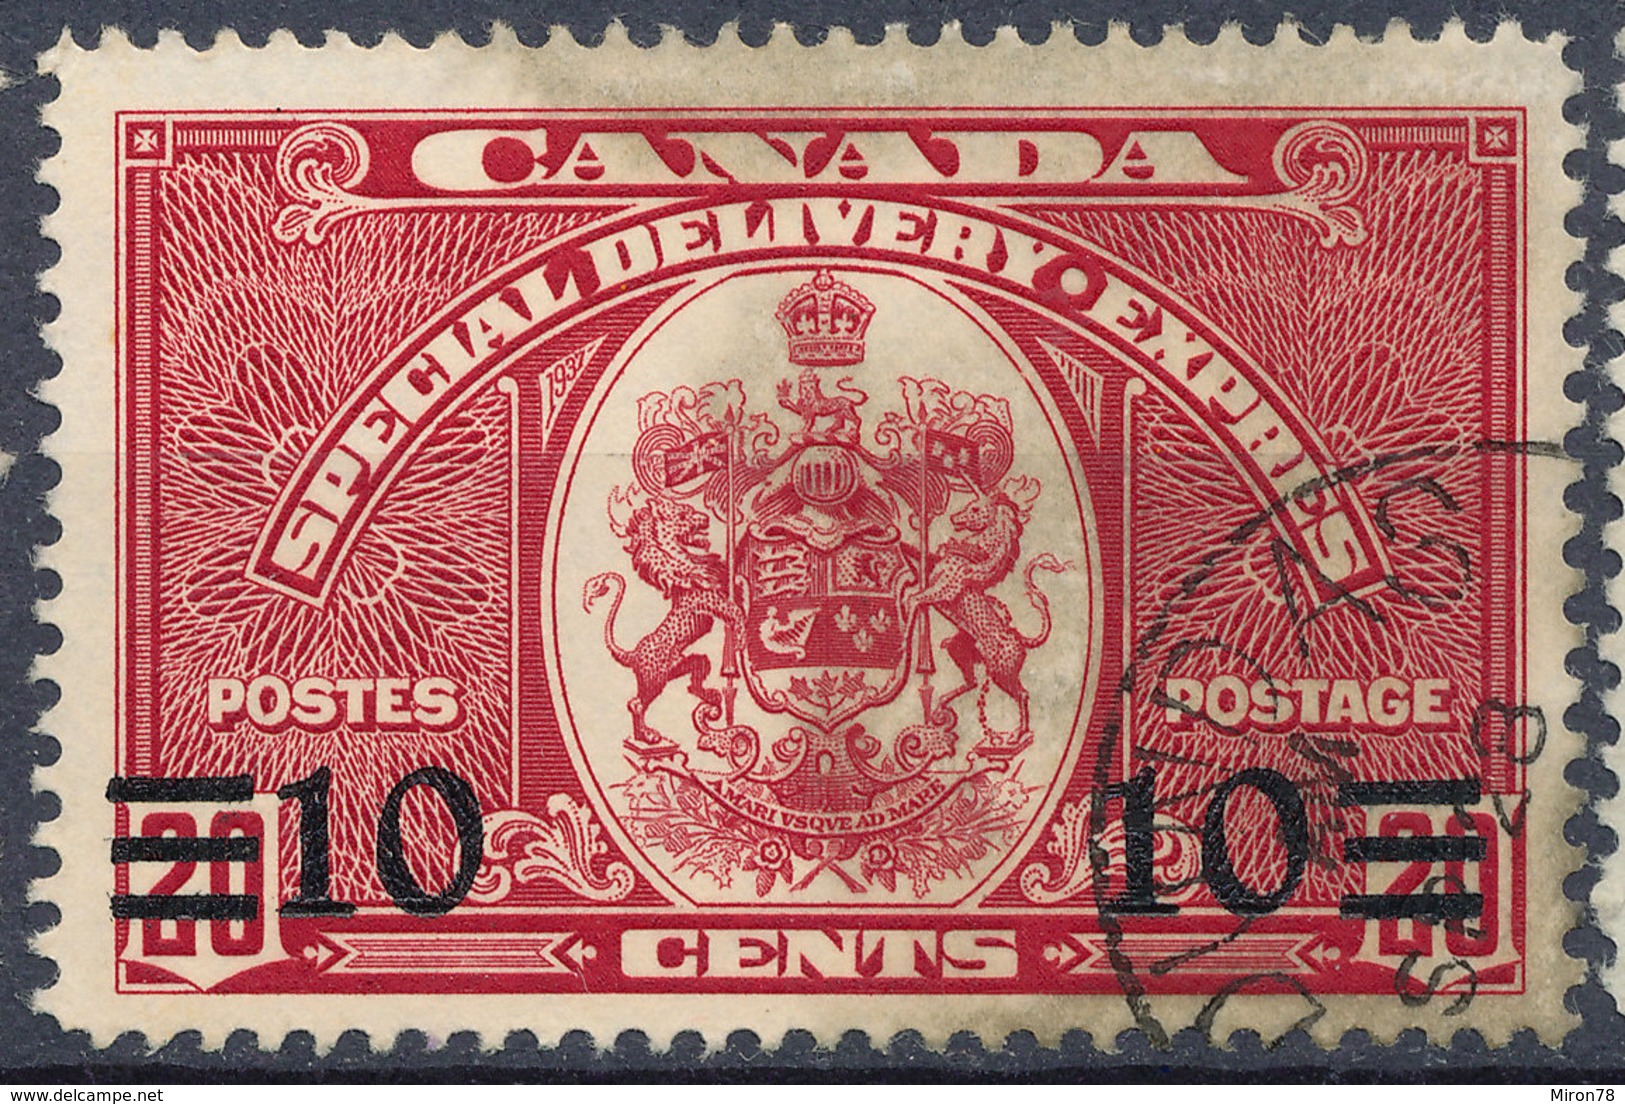 Stamp Canada  1939  Used - Exprès